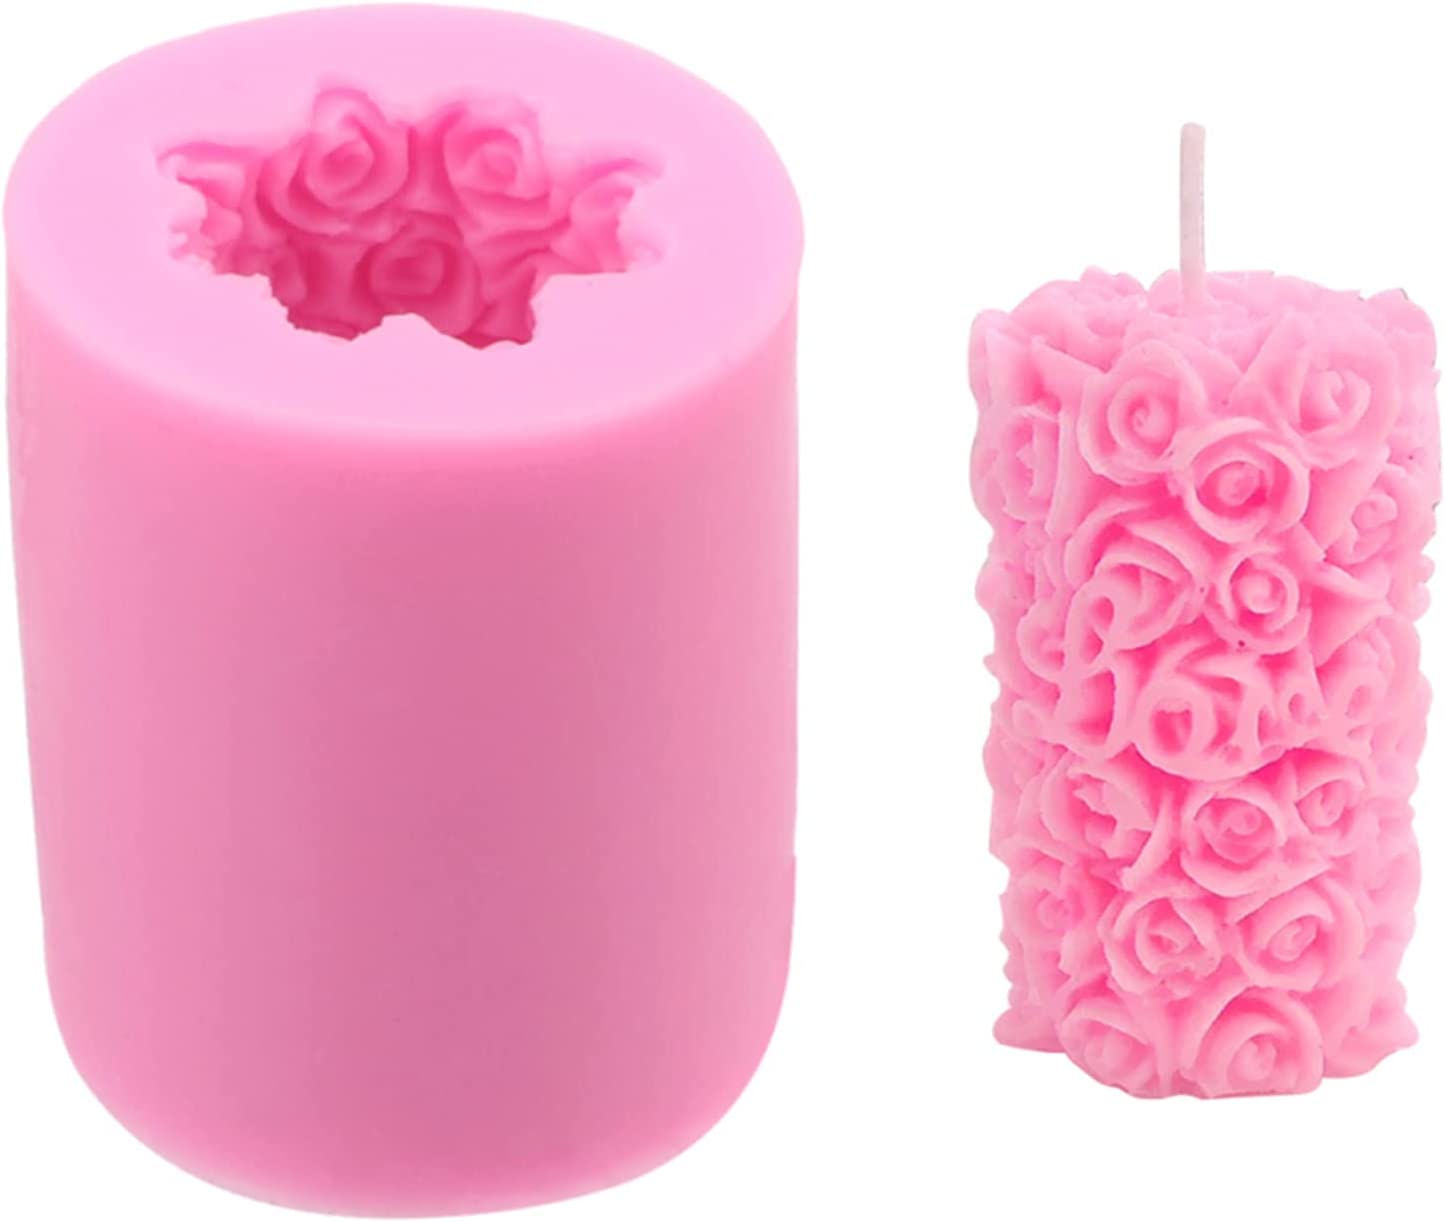 Cylinder Rose Flower Silicone Candle Mold for Handmade Soap, Bath